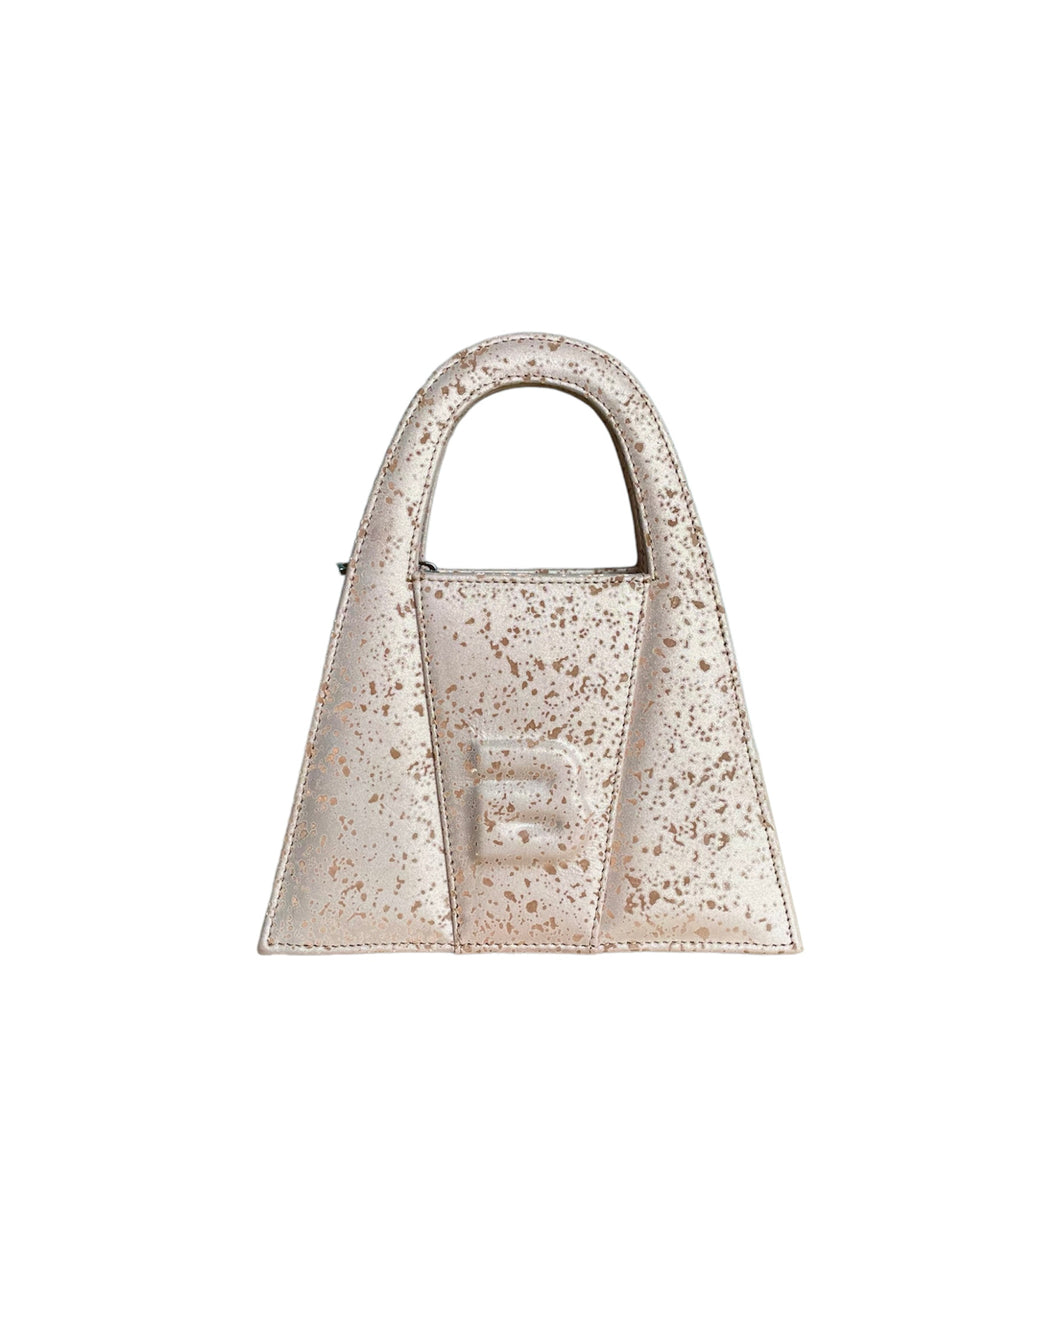 Champagne Pink Leather With Shiny Particles Minnie Lock Bag - LIMITED EDITION